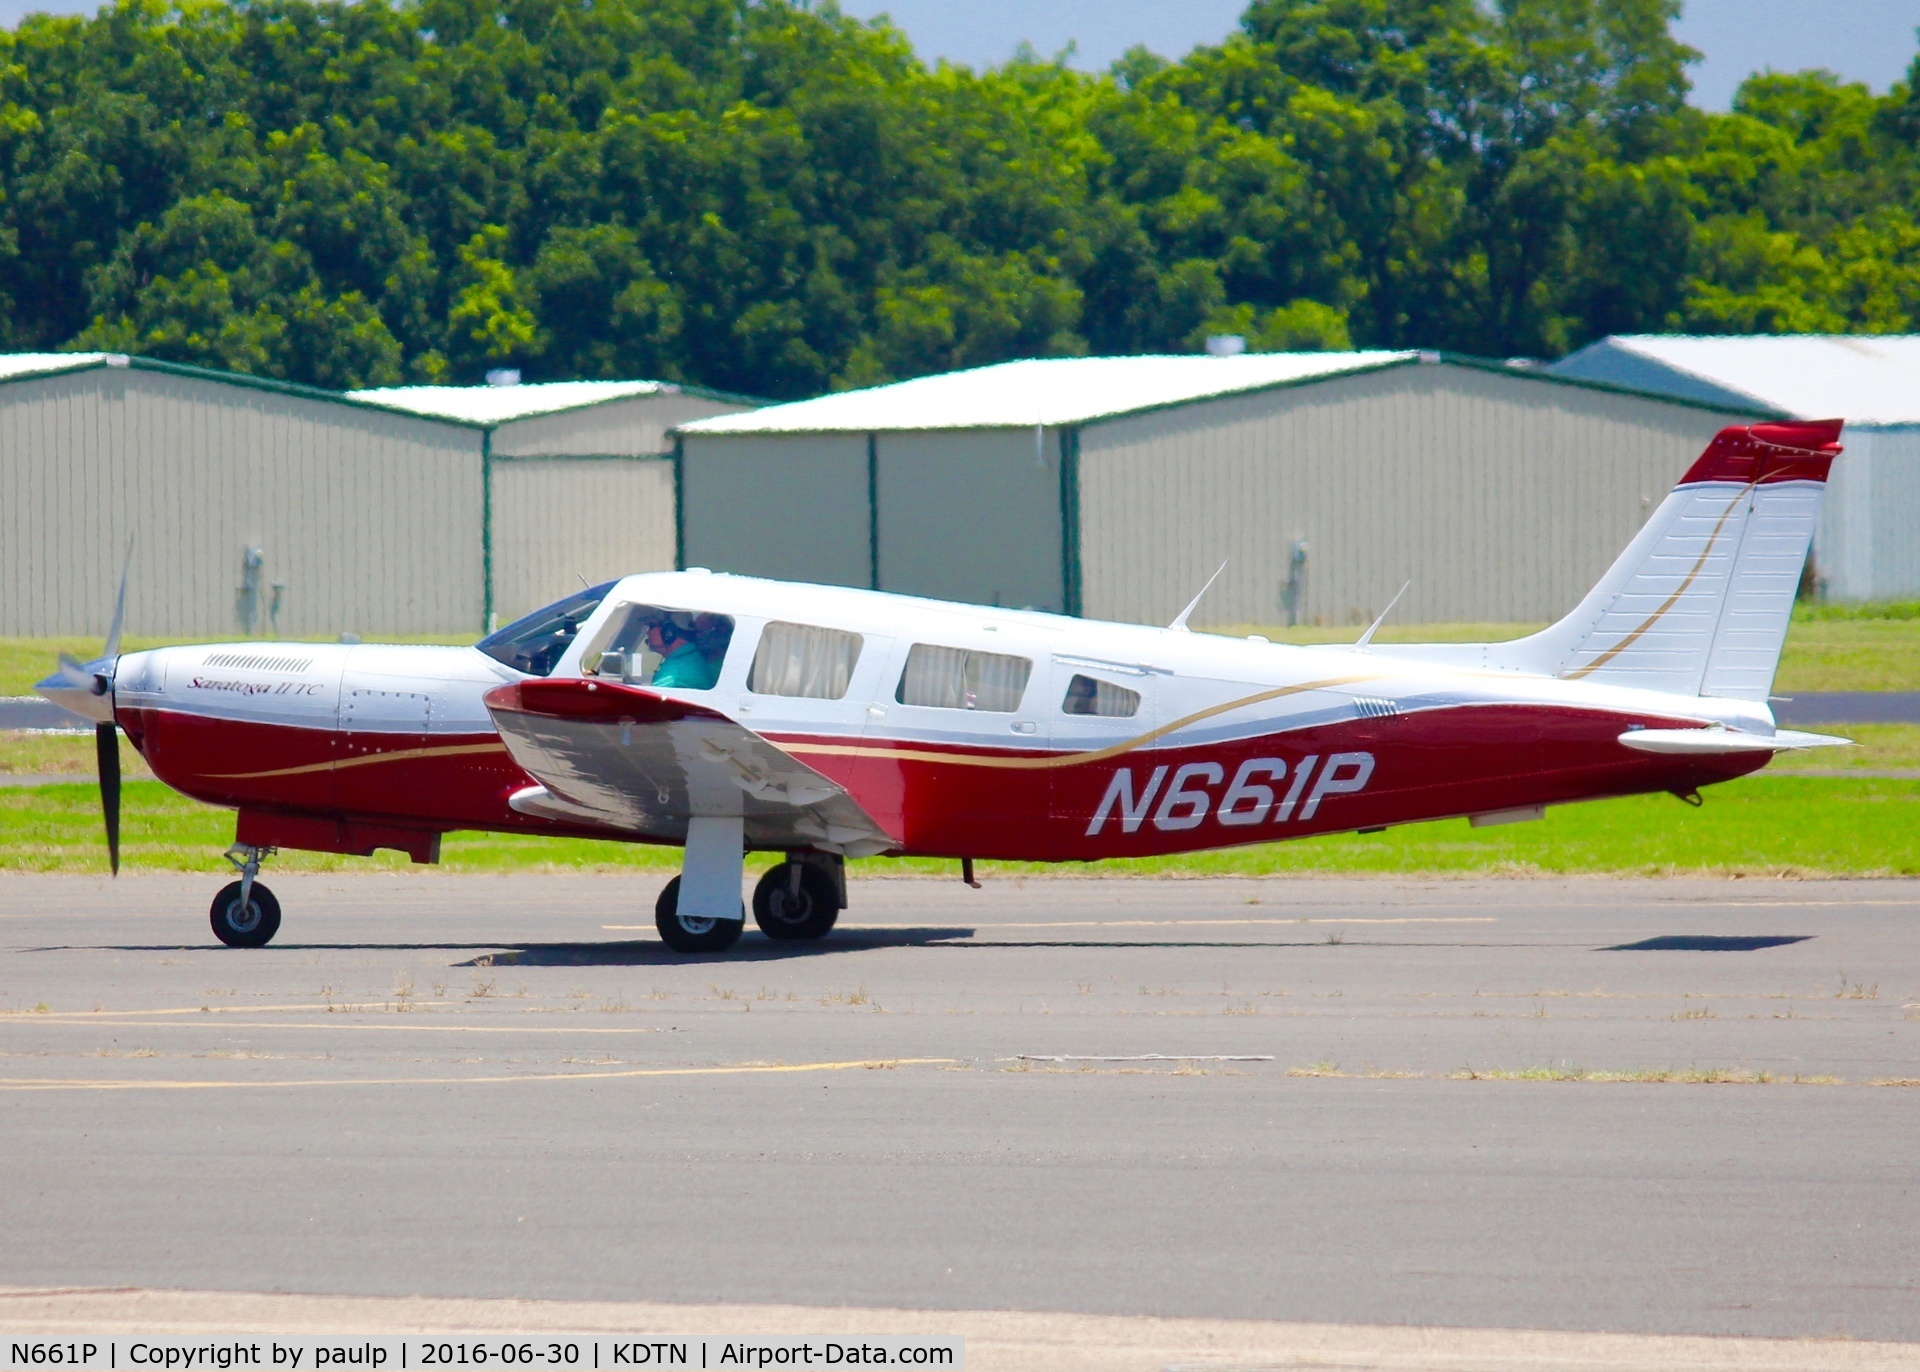 N661P, 1980 Piper PA-32R-301T Turbo Saratoga C/N 32R-8029080, At Downtown Shreveport.